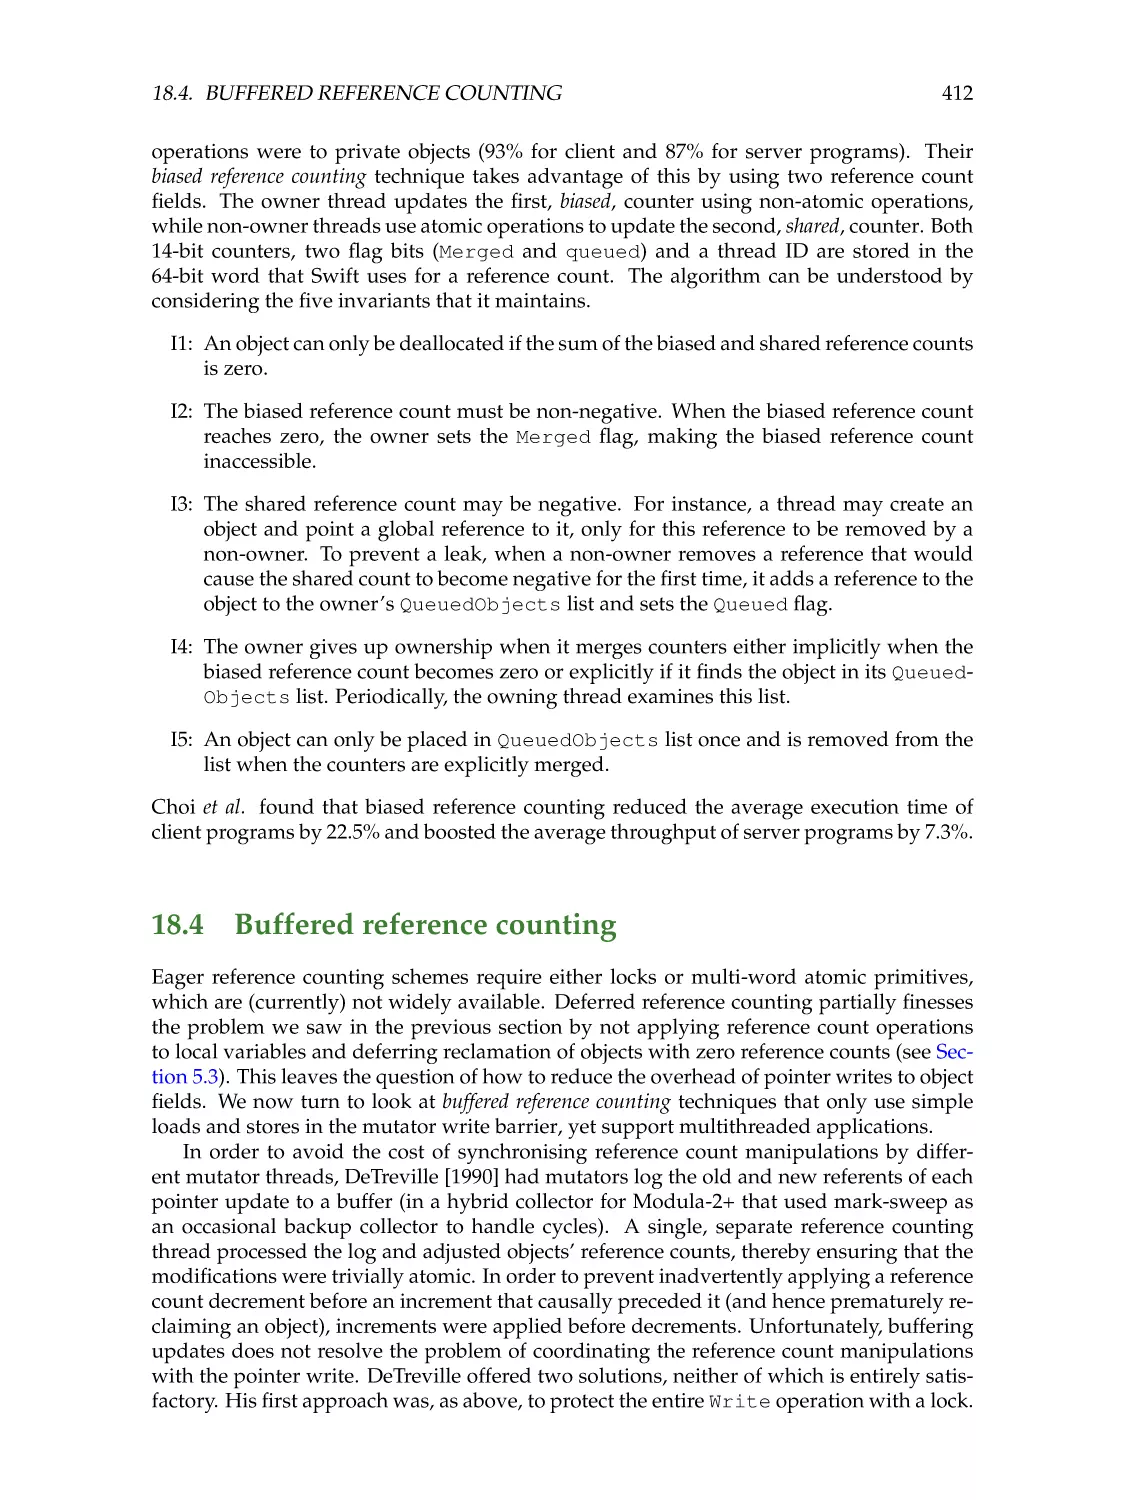 18.4. Buffered reference counting